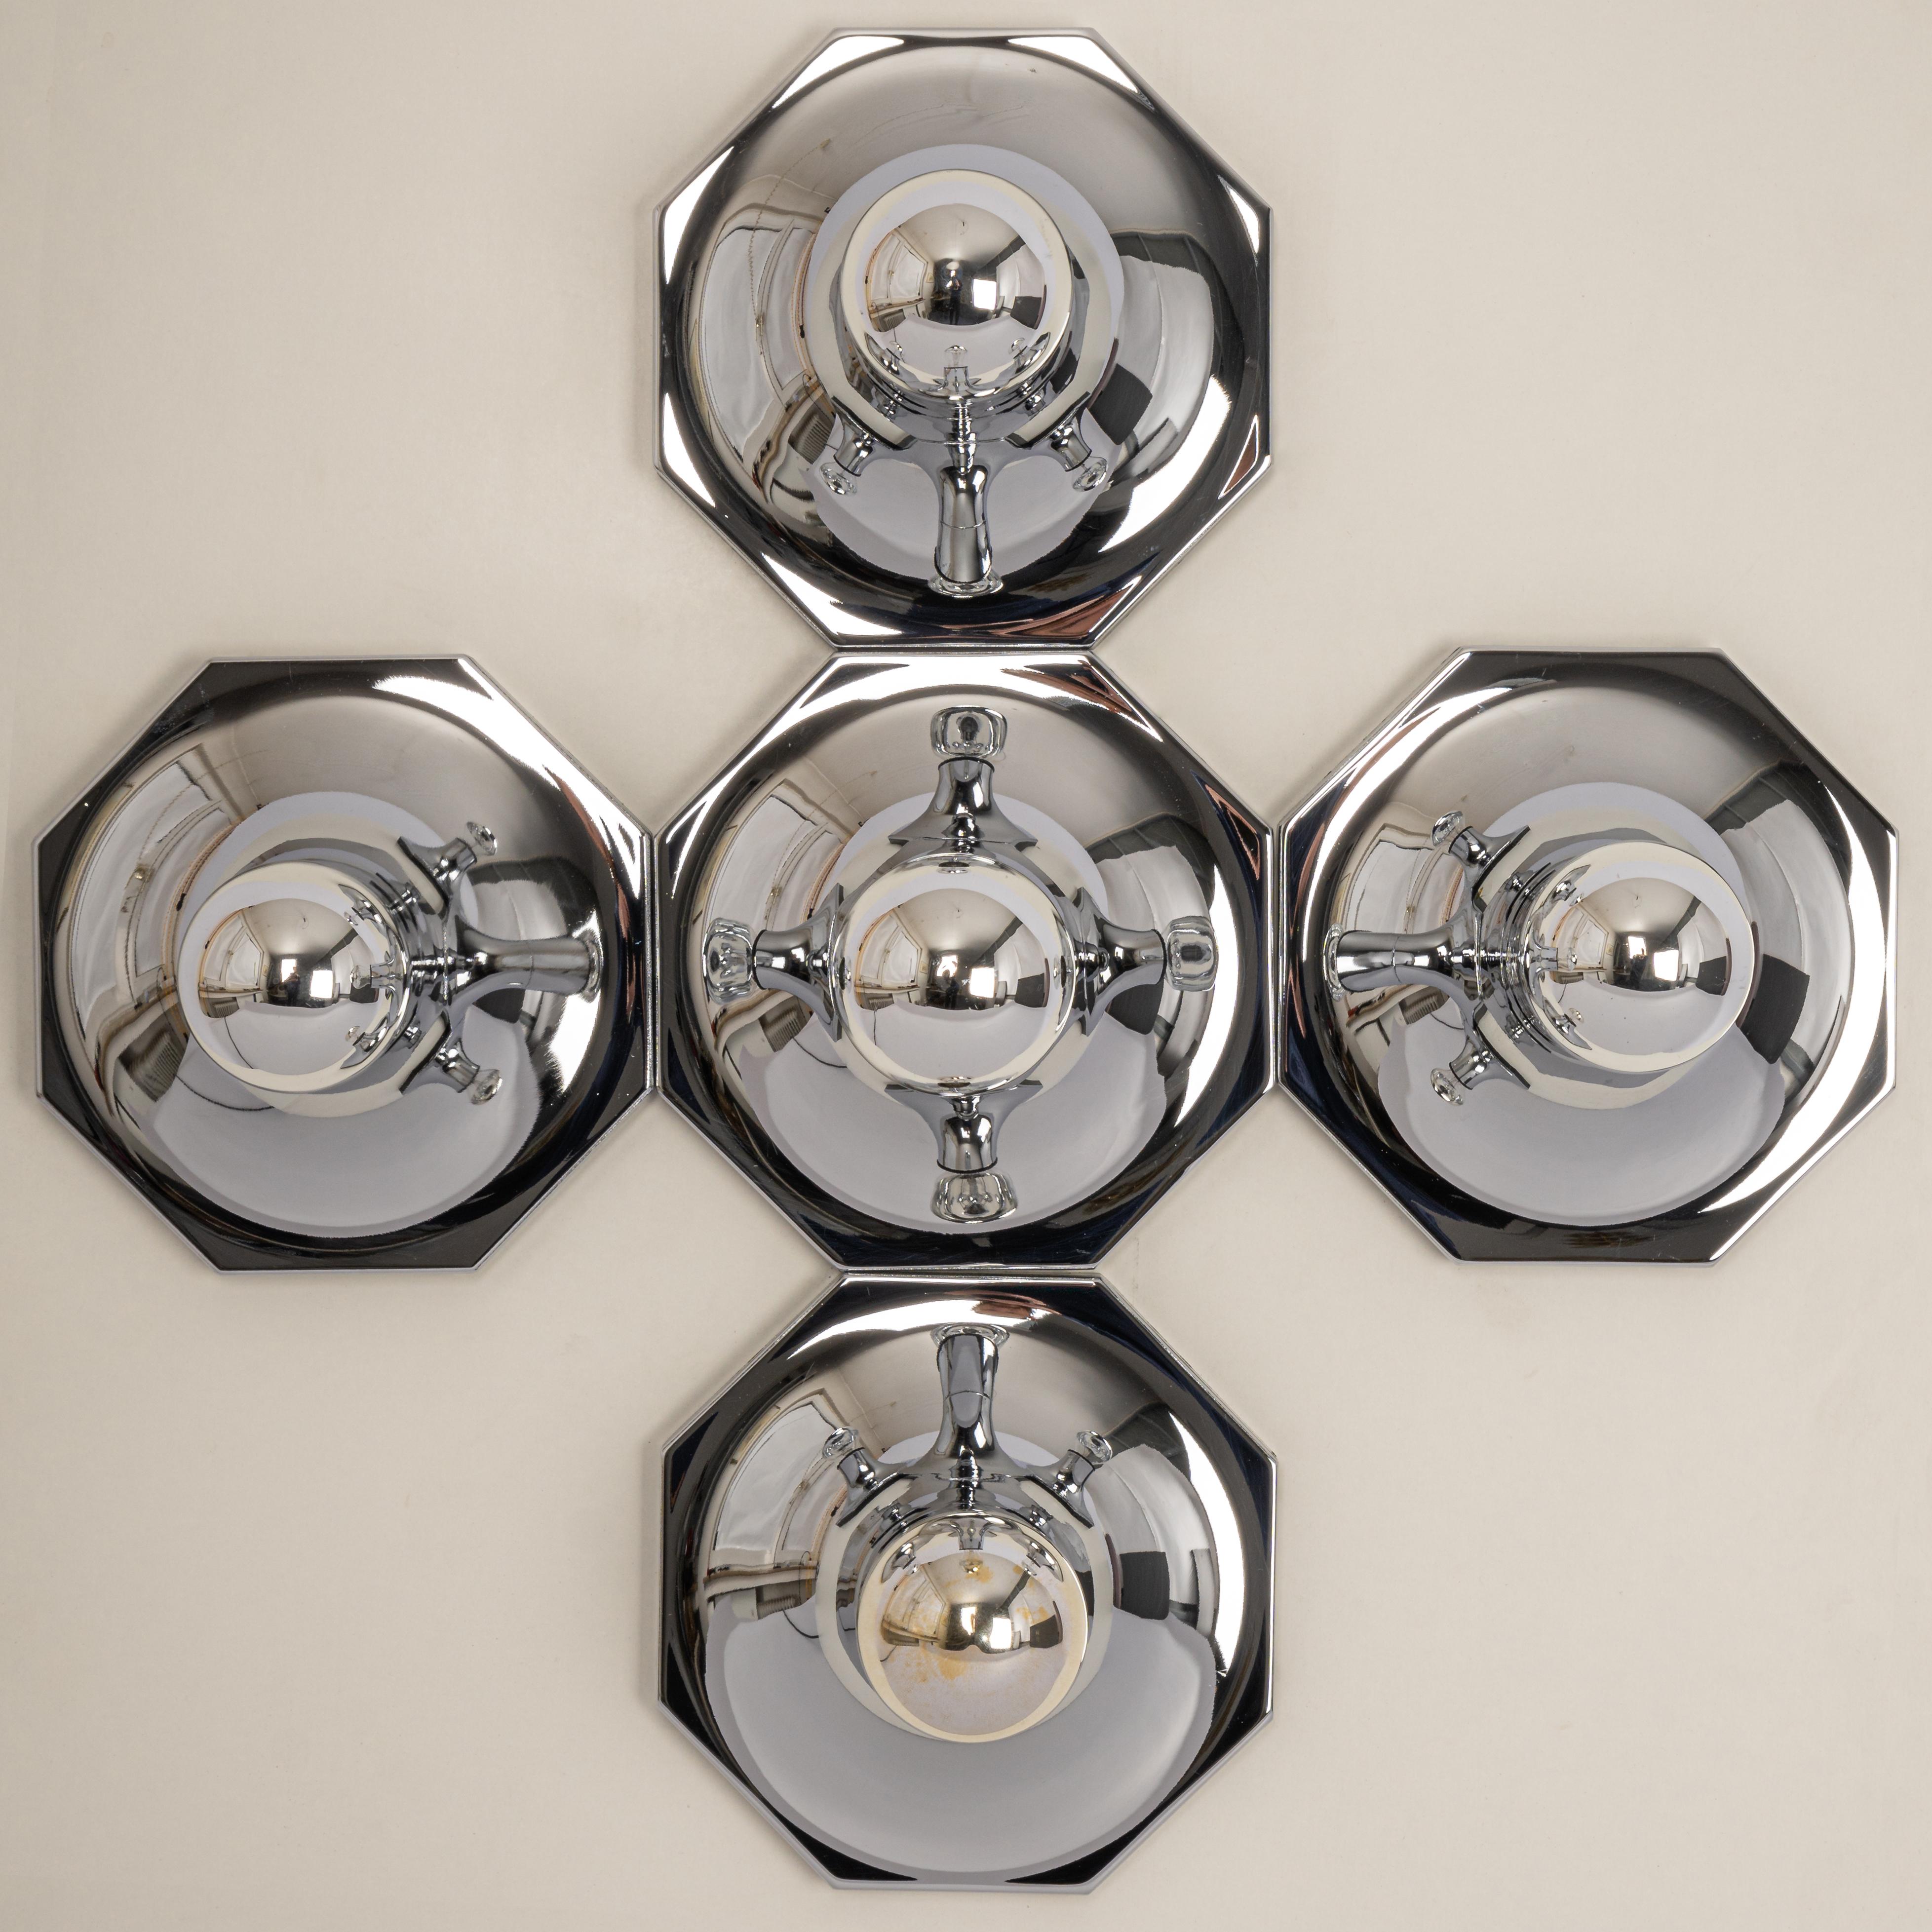 1 of 2 sets of large chrome wall / ceiling light Motoko Ishii, Staff, Germany 1970s
High quality made in Germany made of chrome-plated plastic and metal.
Design Motoko Ishii

Each wall light needs 5 x E27 Standard bulbs.
Light bulbs are not